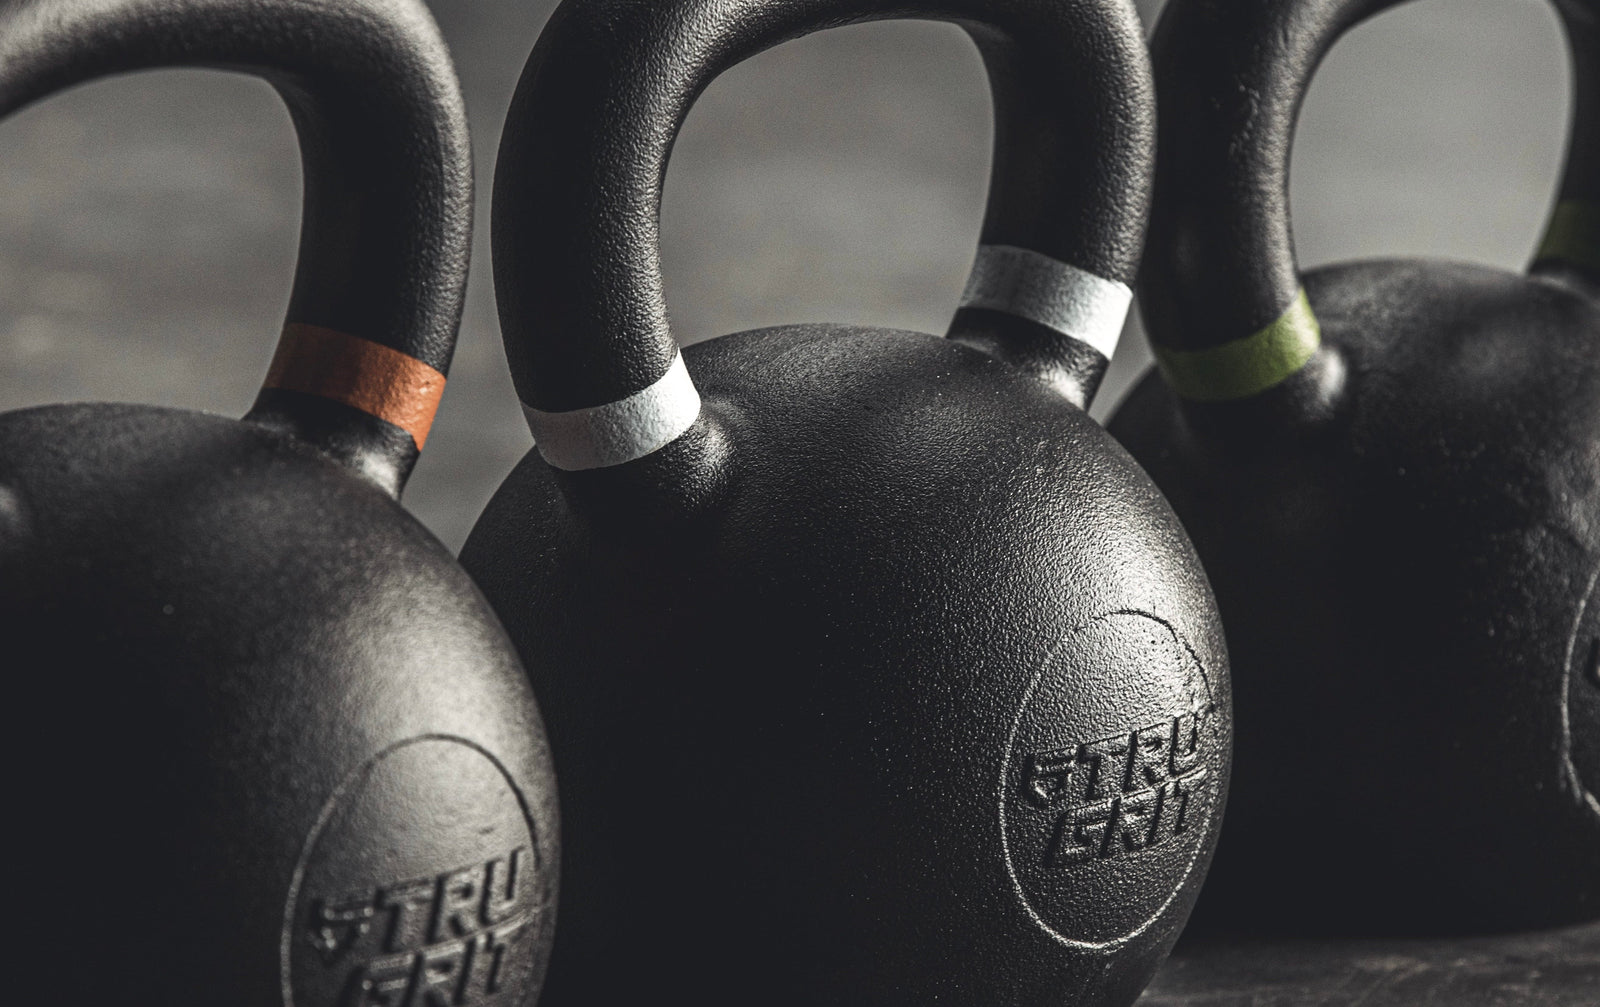 What Is A Kettlebell & How Do You Use One?